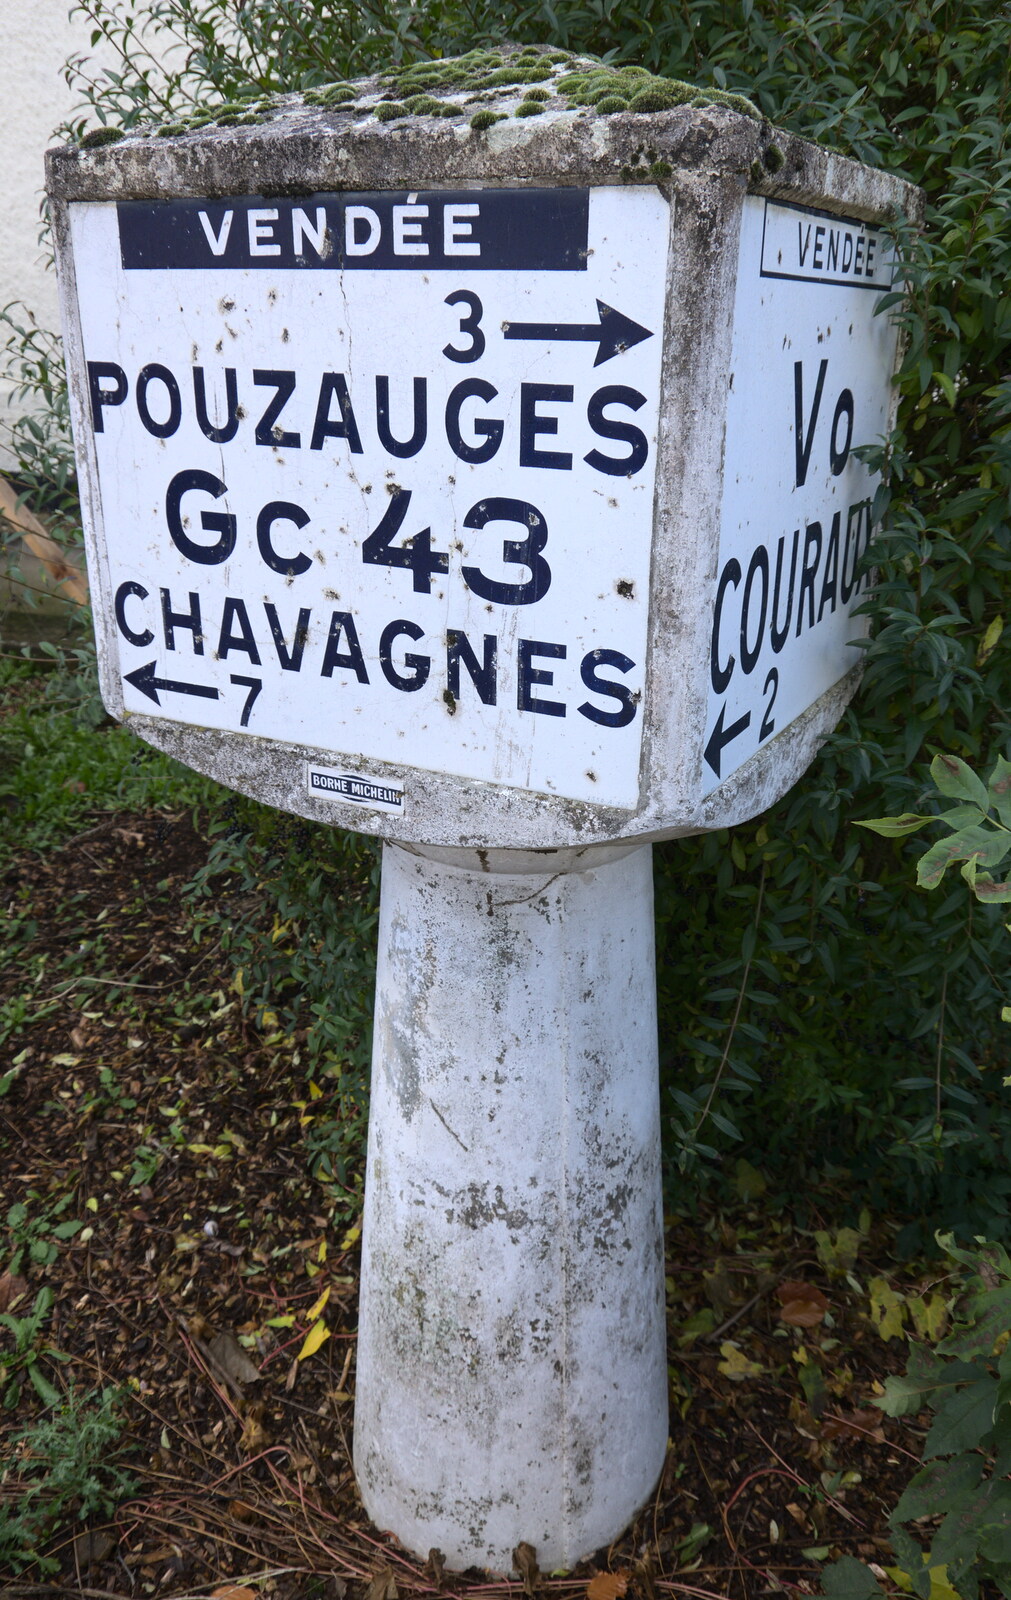 The French road sign from Pouzauges from The Remembrance Sunday Parade, Eye, Suffolk - 11th November 2018